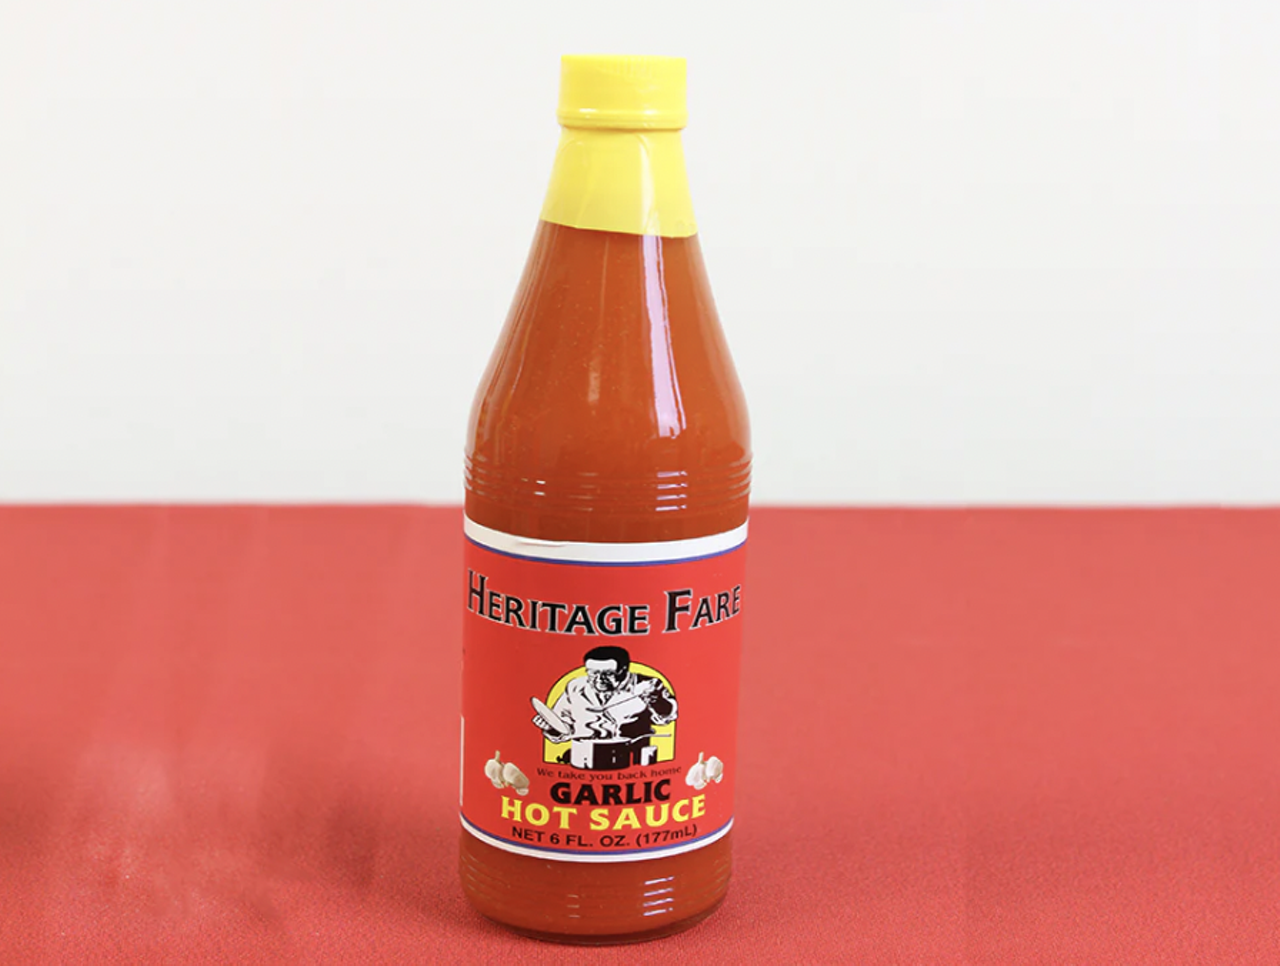 Heritage Fare Garlic Hot Sauce Once you try this Cleveland-based company's Heritage Fare Garlic Hot Sauce, you'll wonder how you ever managed without it.  So will your host.